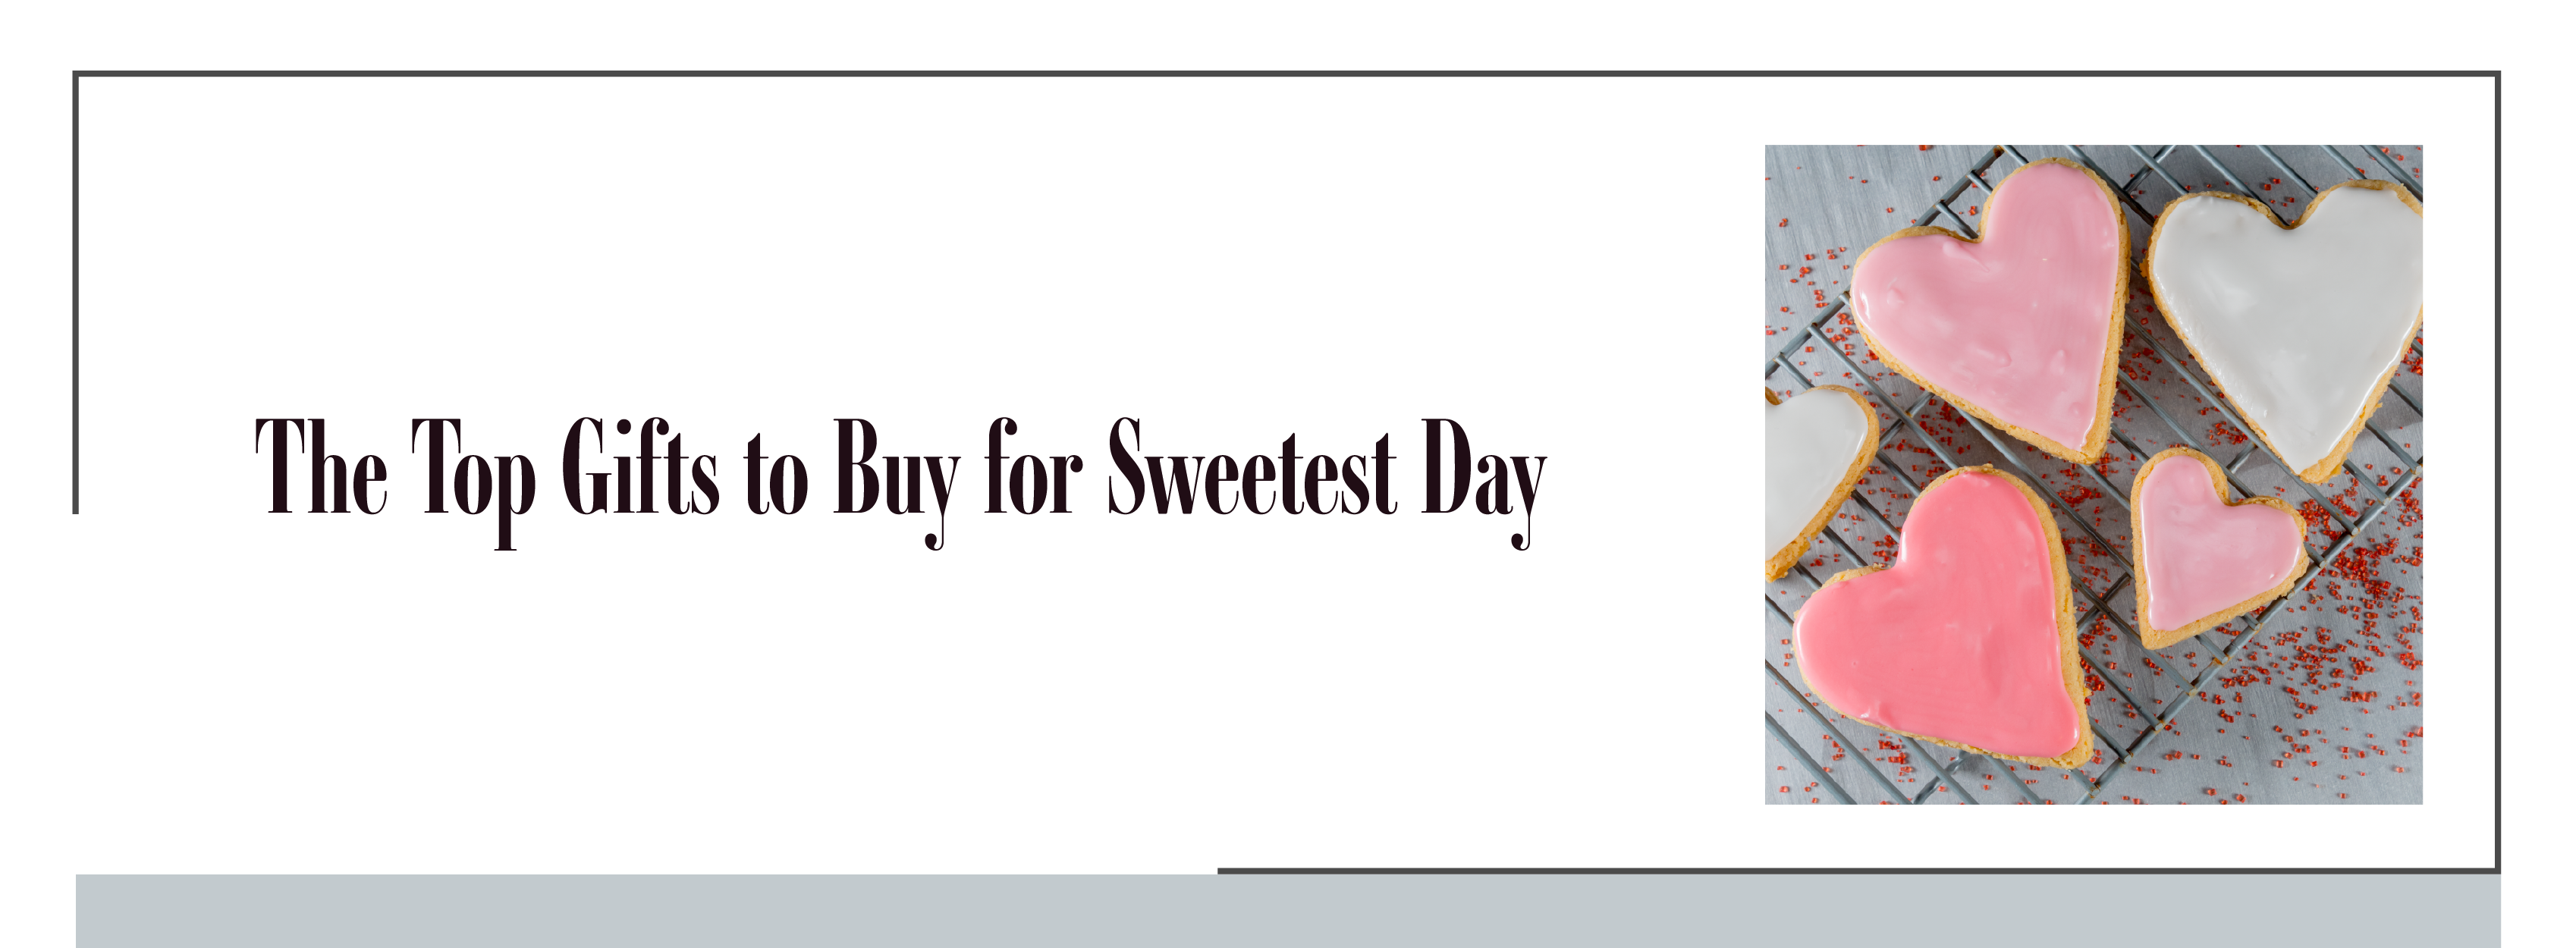 Top Gifts to Buy for Sweetest Day 2022